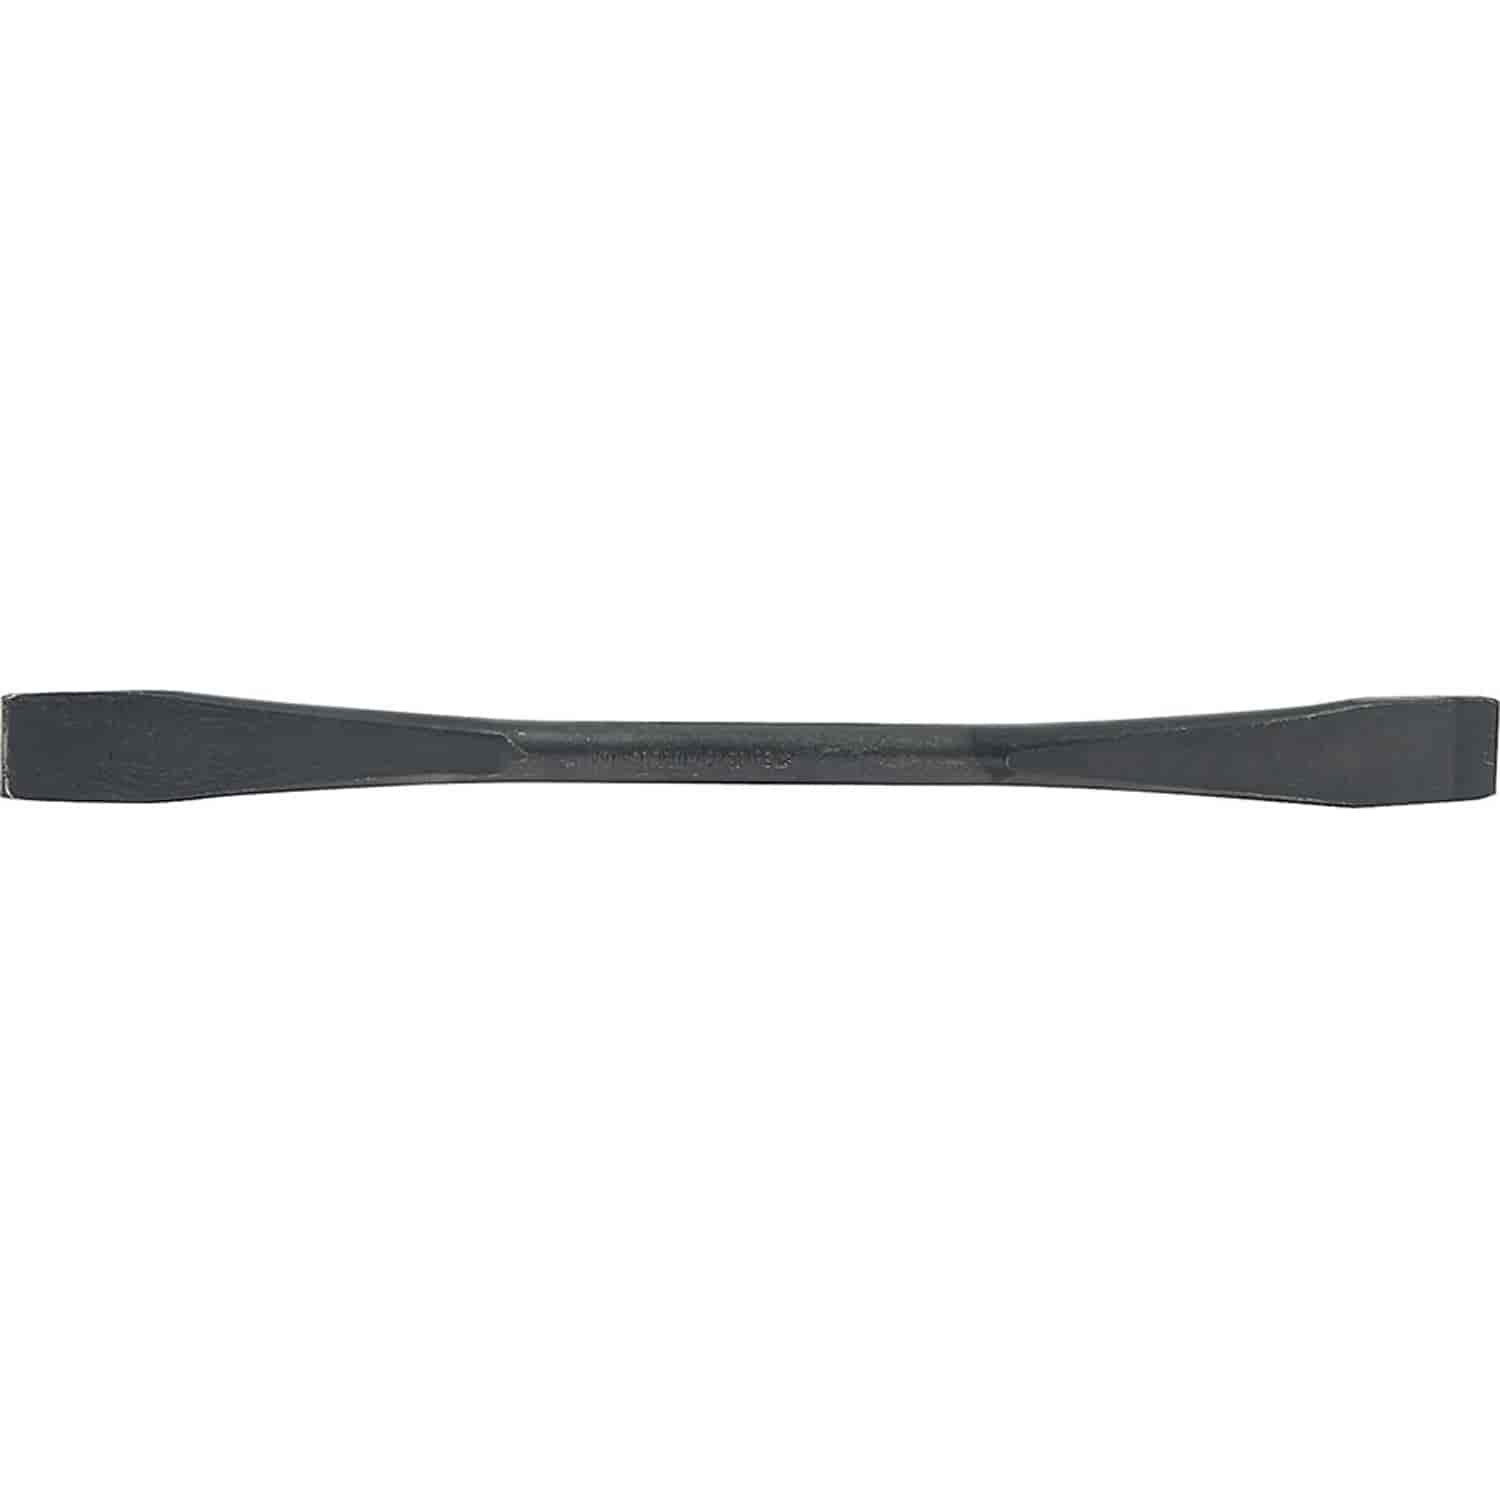 Tire Spoon 16-1/2" Curved